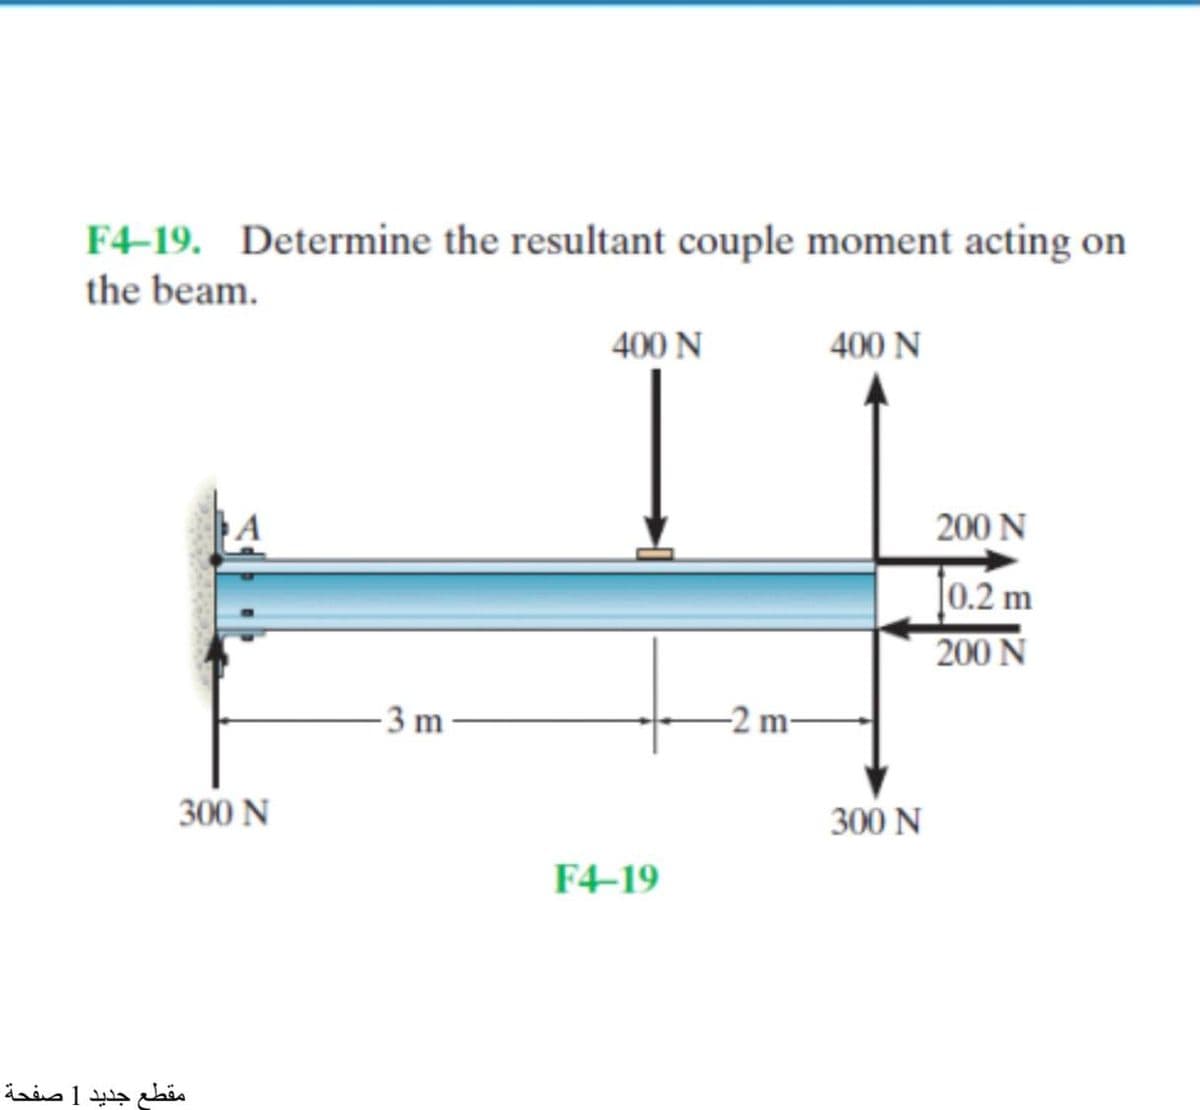 F4–19. Determine the resultant couple moment acting on
the beam.
400 N
400 N
A
200 N
]0.2 m
200 N
-3 m -
-2 m-
300 N
300 N
F4-19
مقطع جديد 1 صفحة
